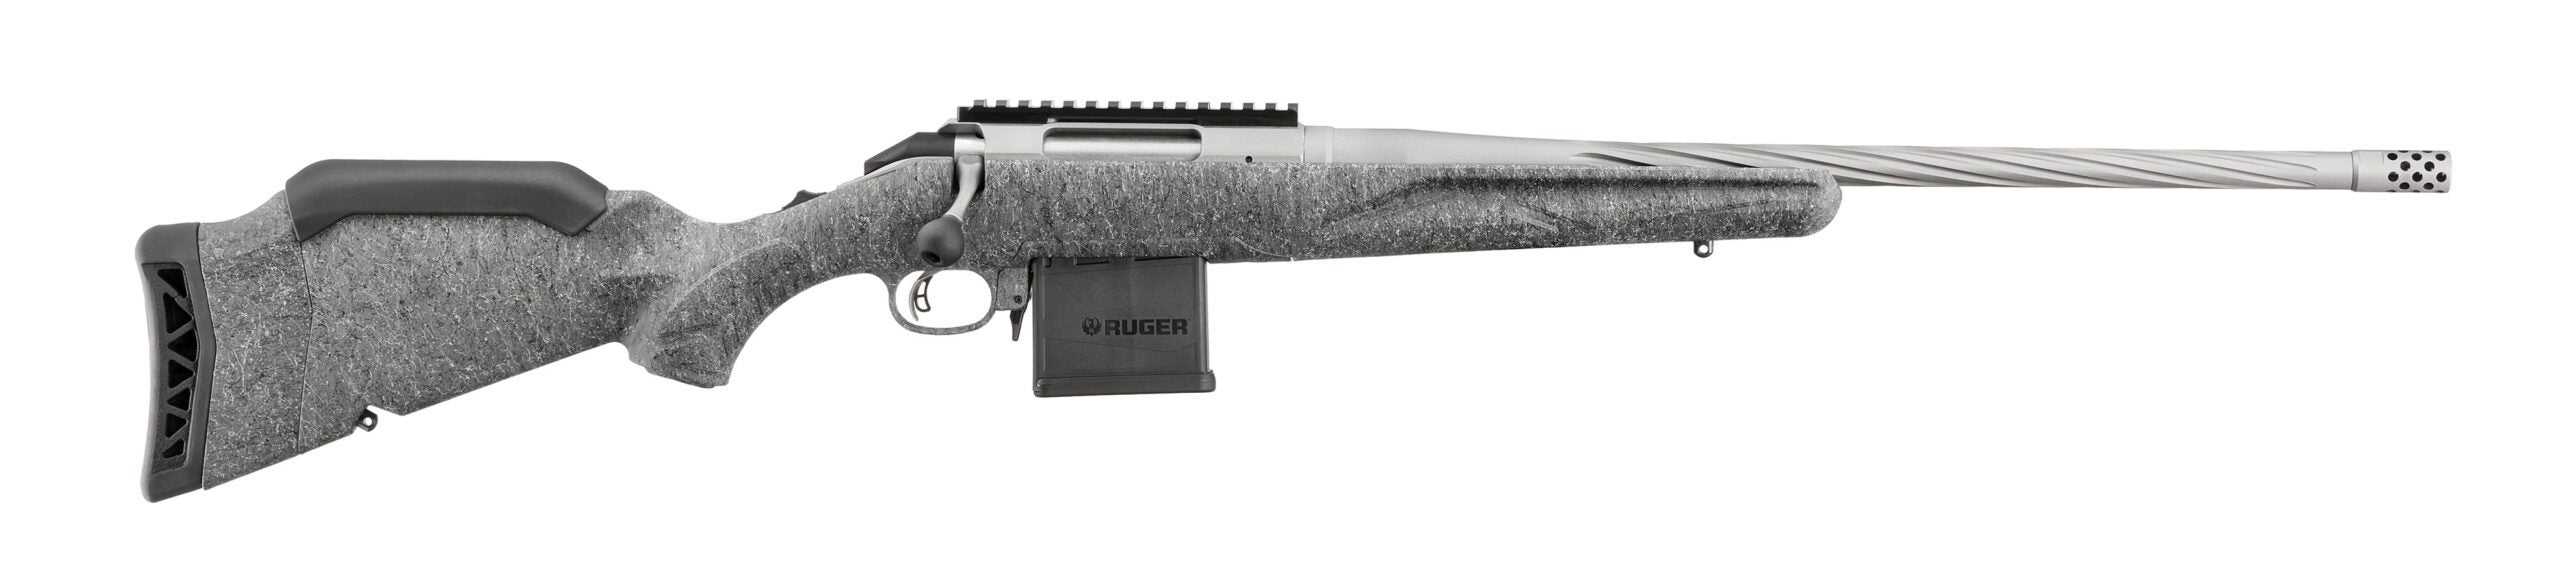 The new Ruger American Gen II rifle on a white background